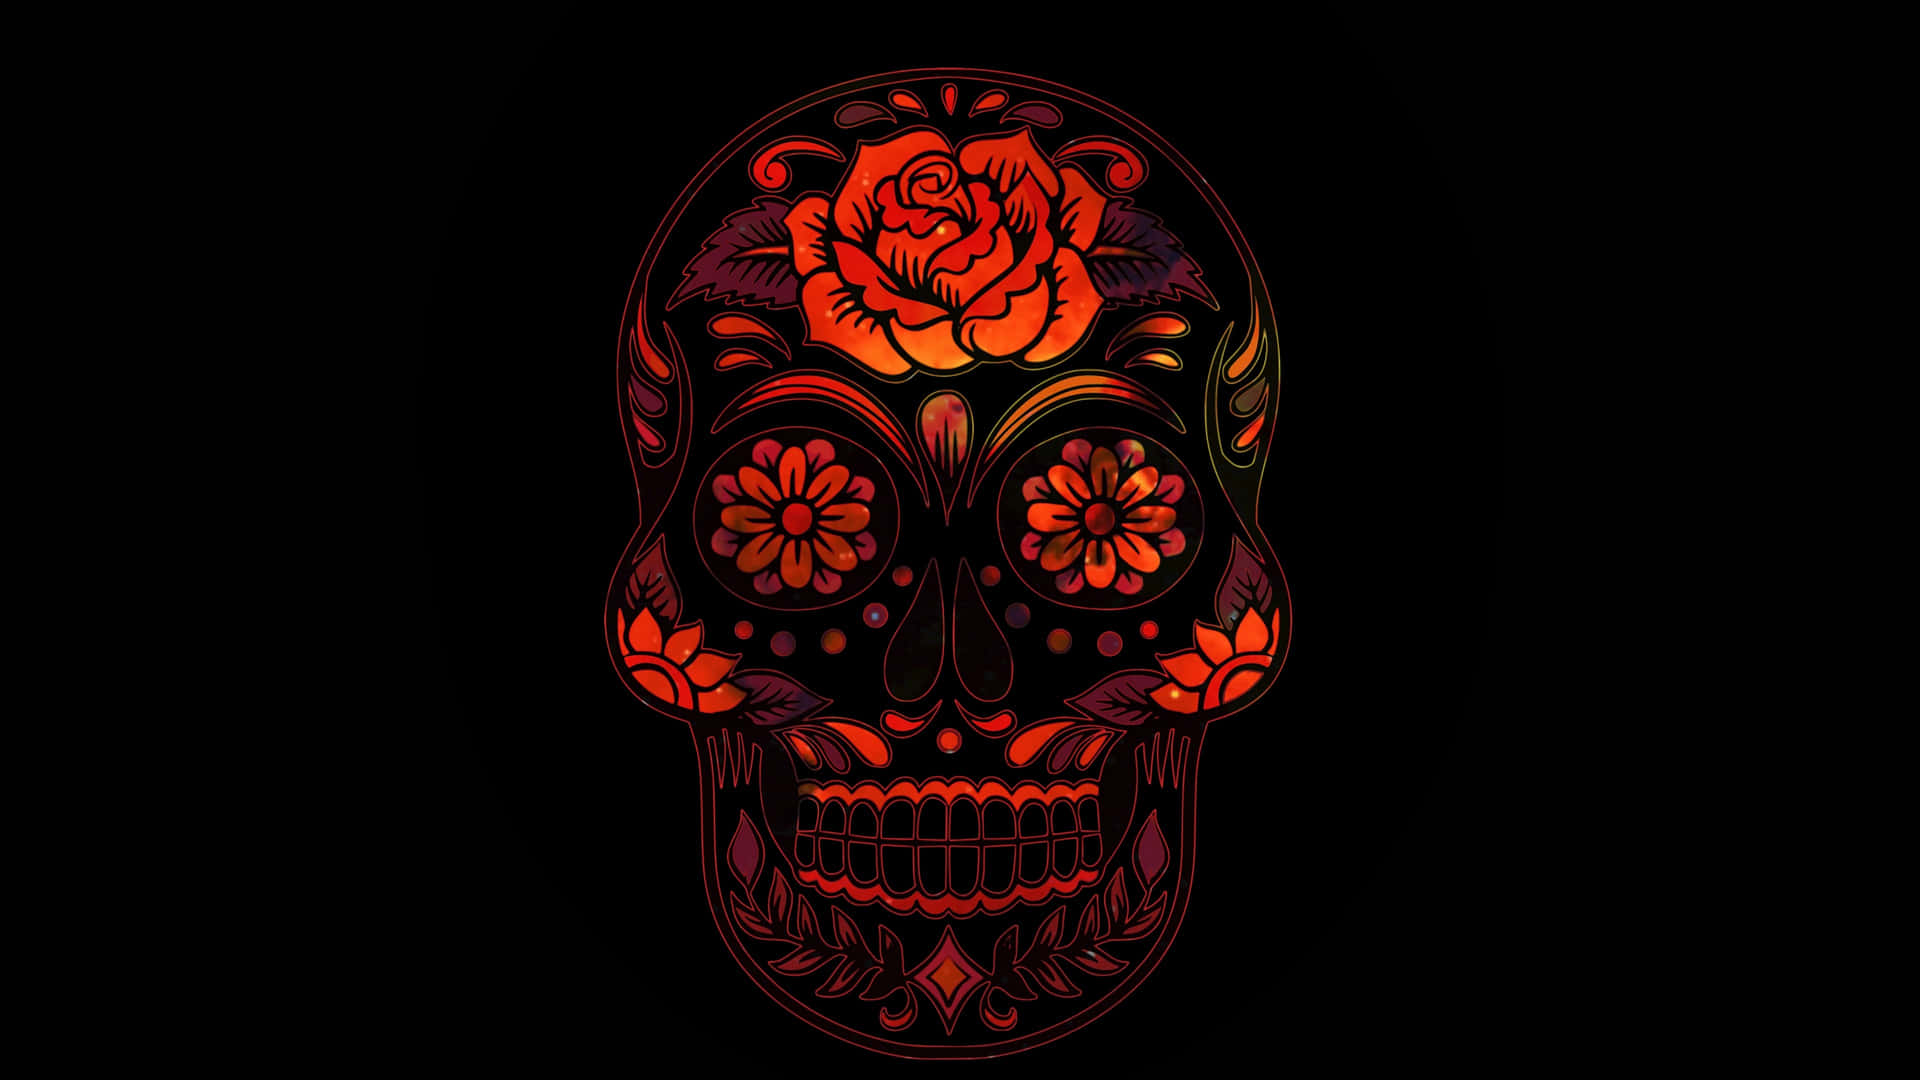 Sugar Skull - A Unique and Colorful Take on a Day of the Dead Theme